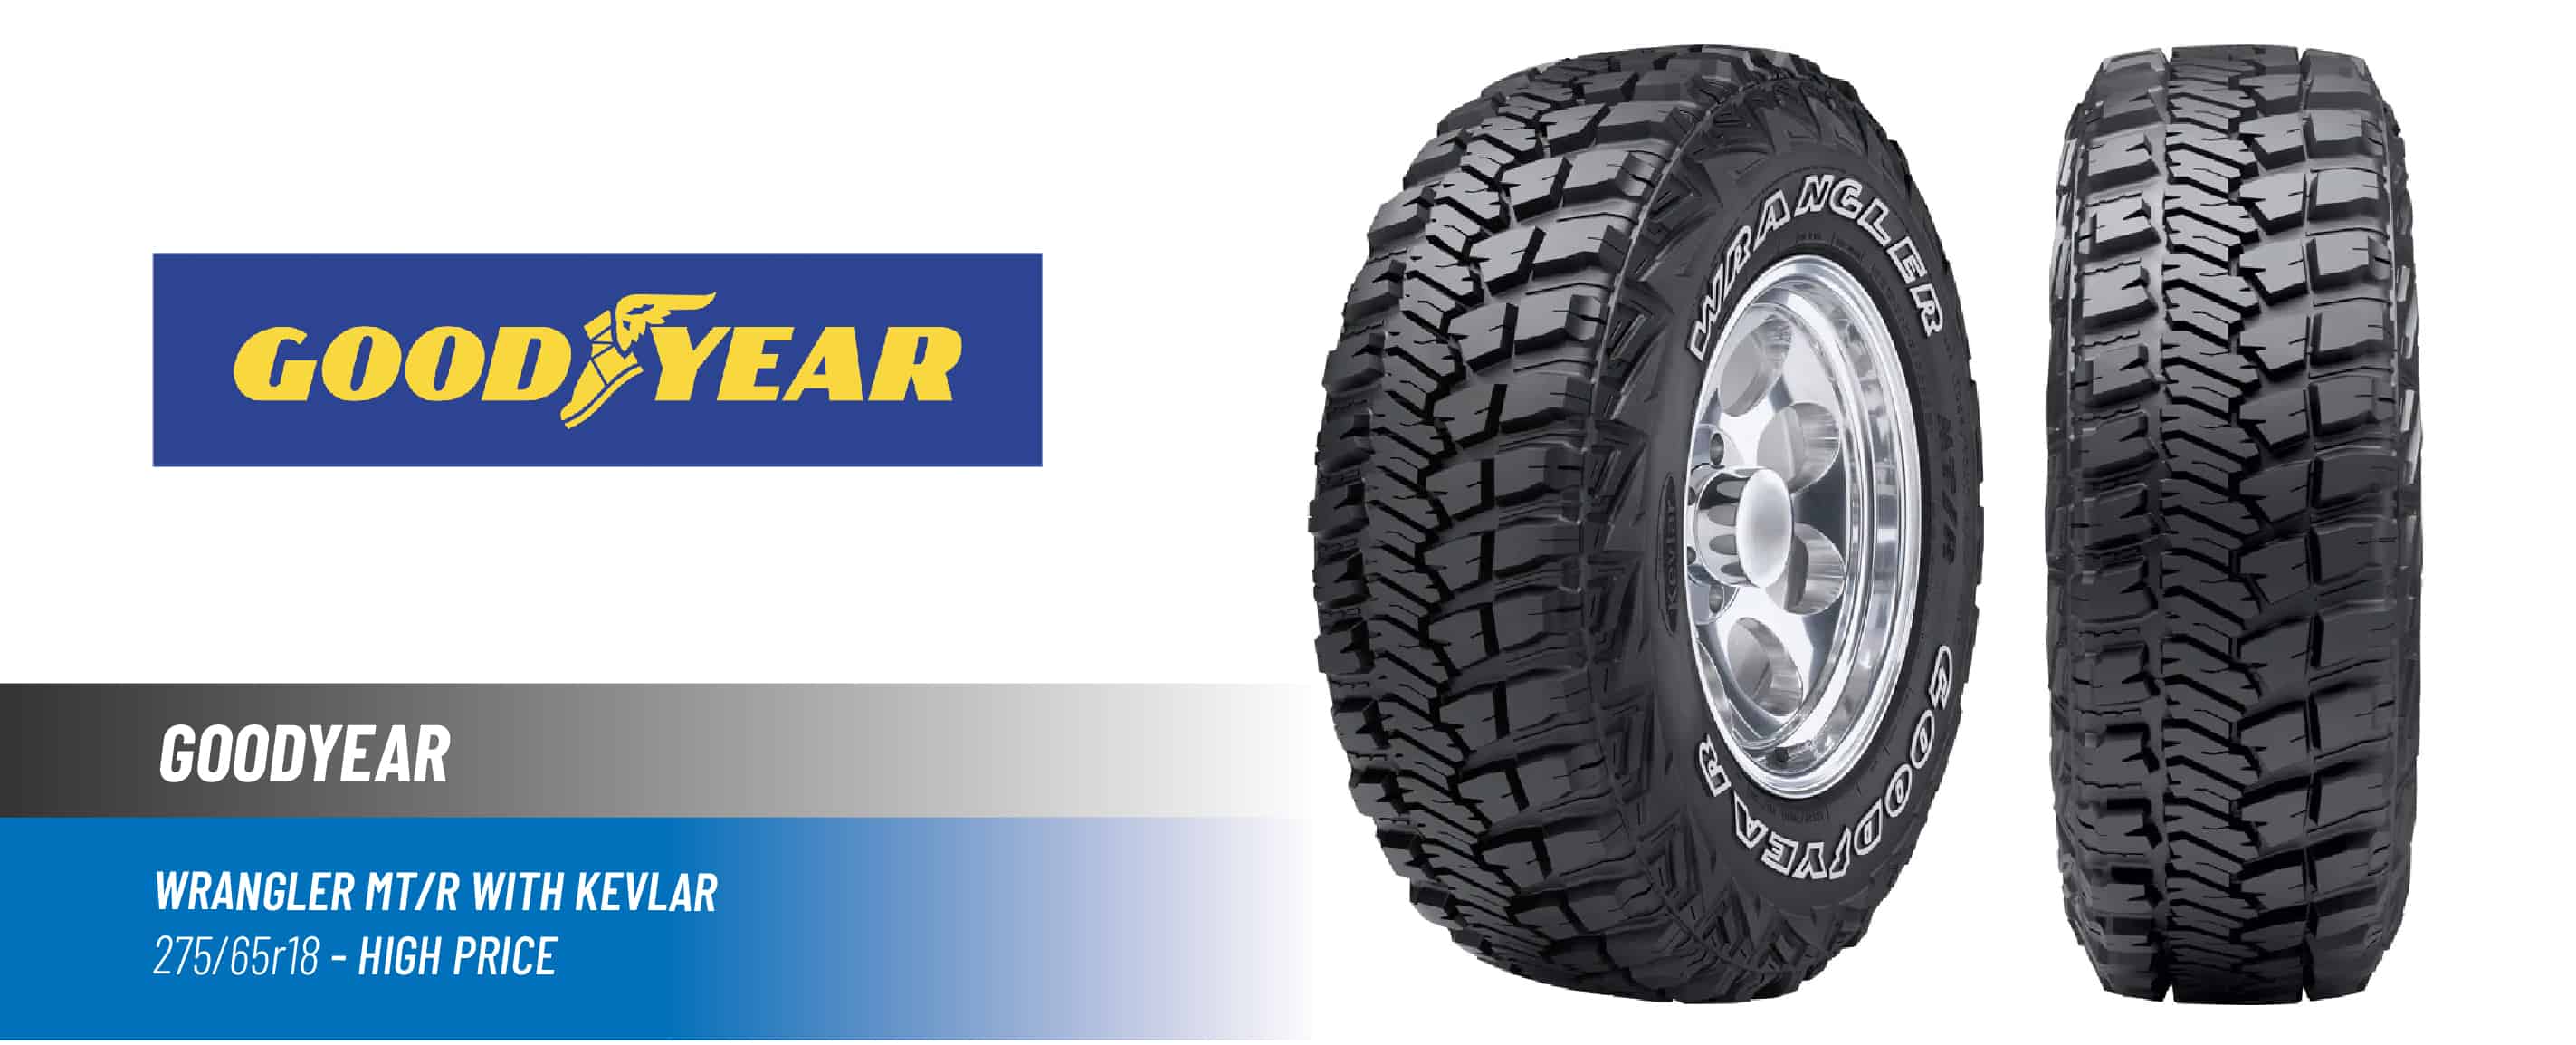 Top#1 High Price: Goodyear Wrangler MT/R with Kevlar – best 275/65 r18